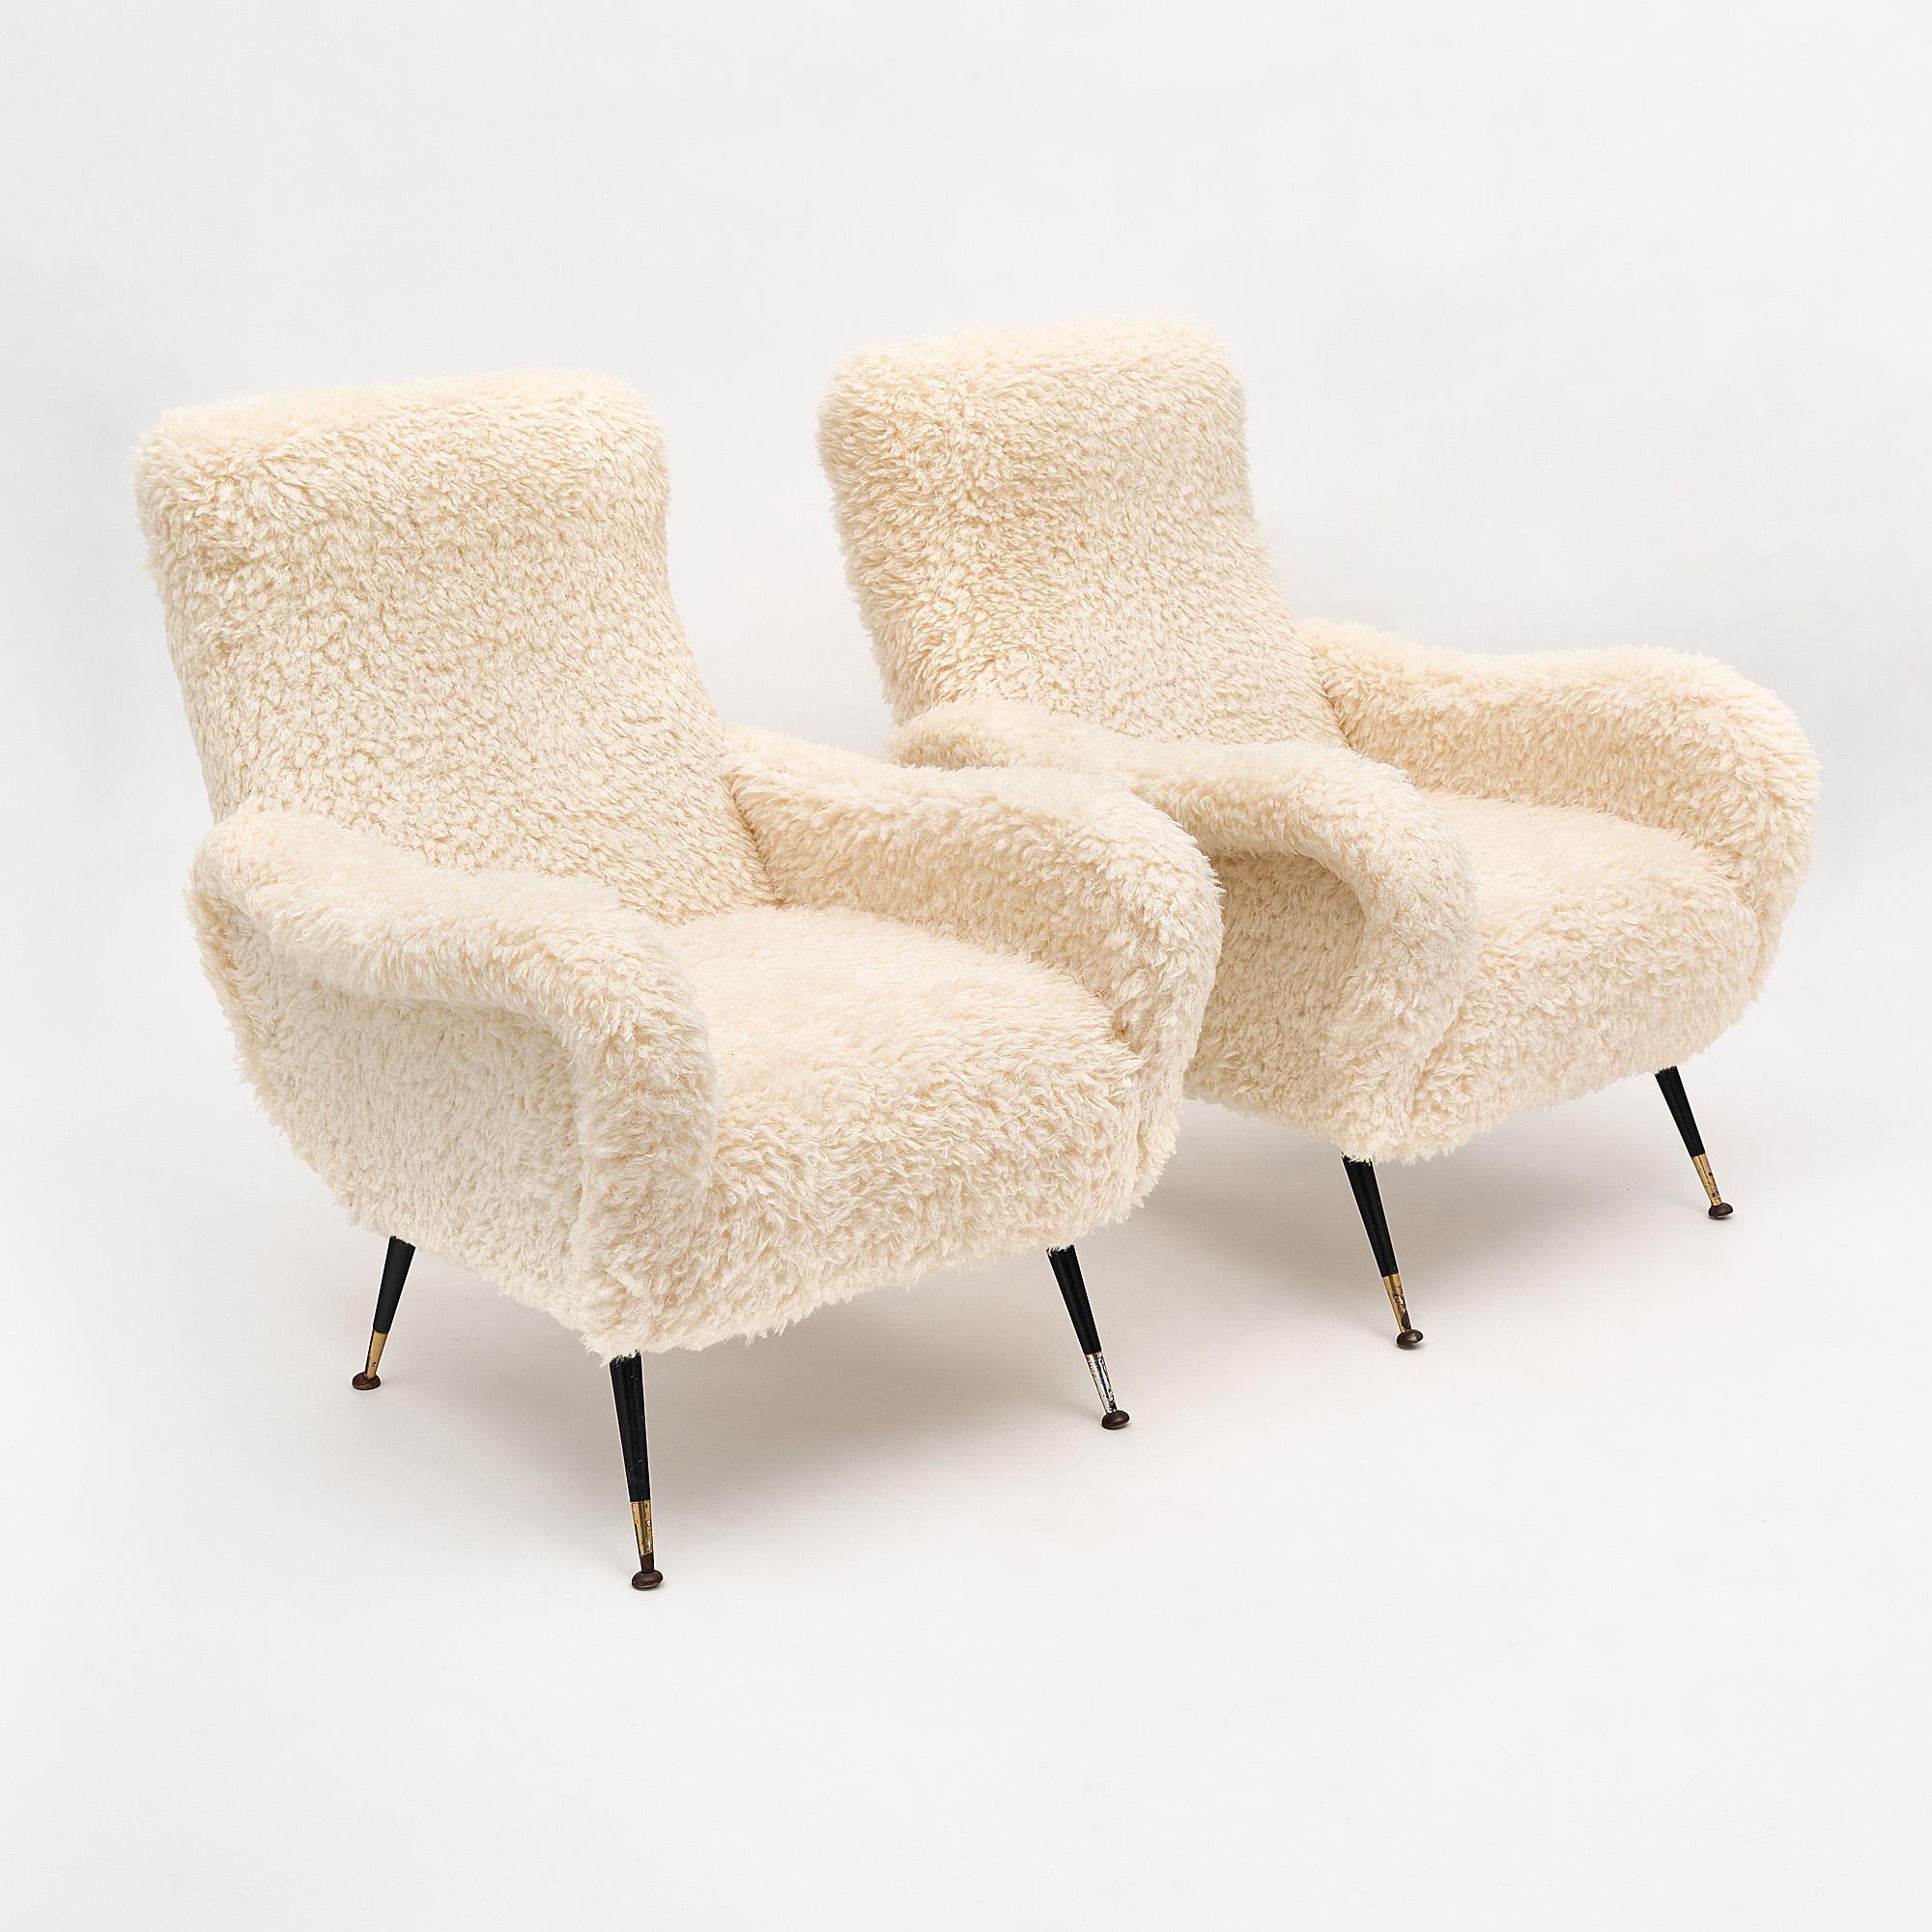 Italian vintage armchairs newly upholstered in a wool blend fur fabric. We love the iconic Italian lacquered steel and brass legs and warmth this pair brings to a space.